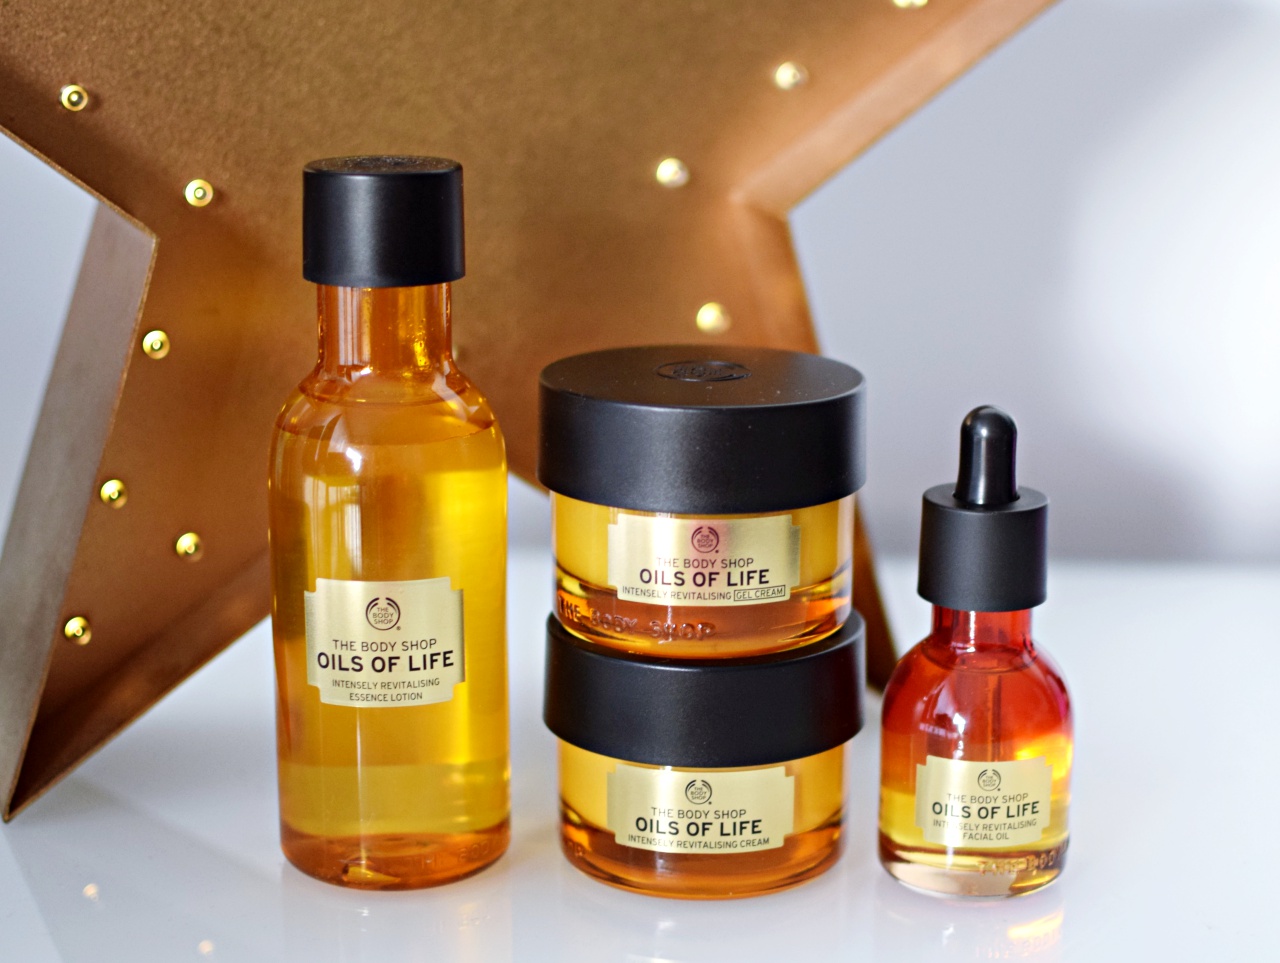 The Body Shop Oils of LIfe